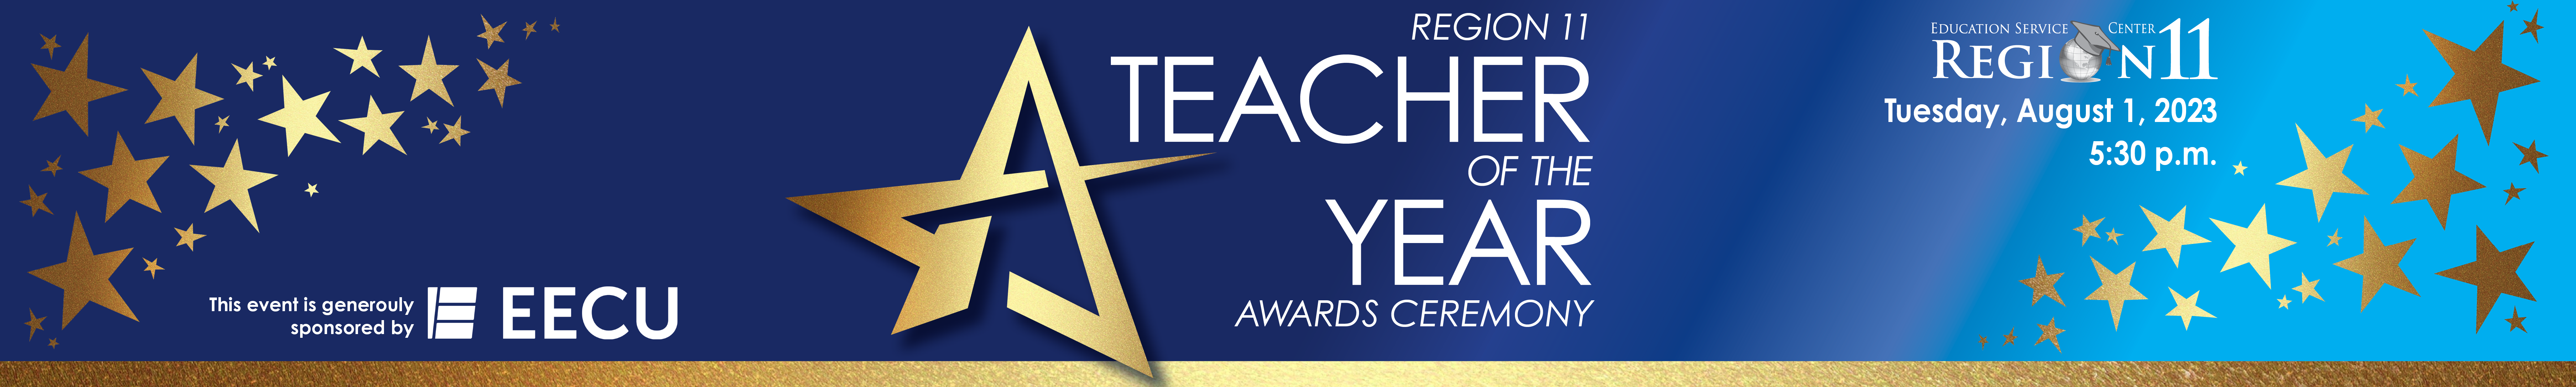 Region 11 Teacher of the Year Banner - blue background with gold stars